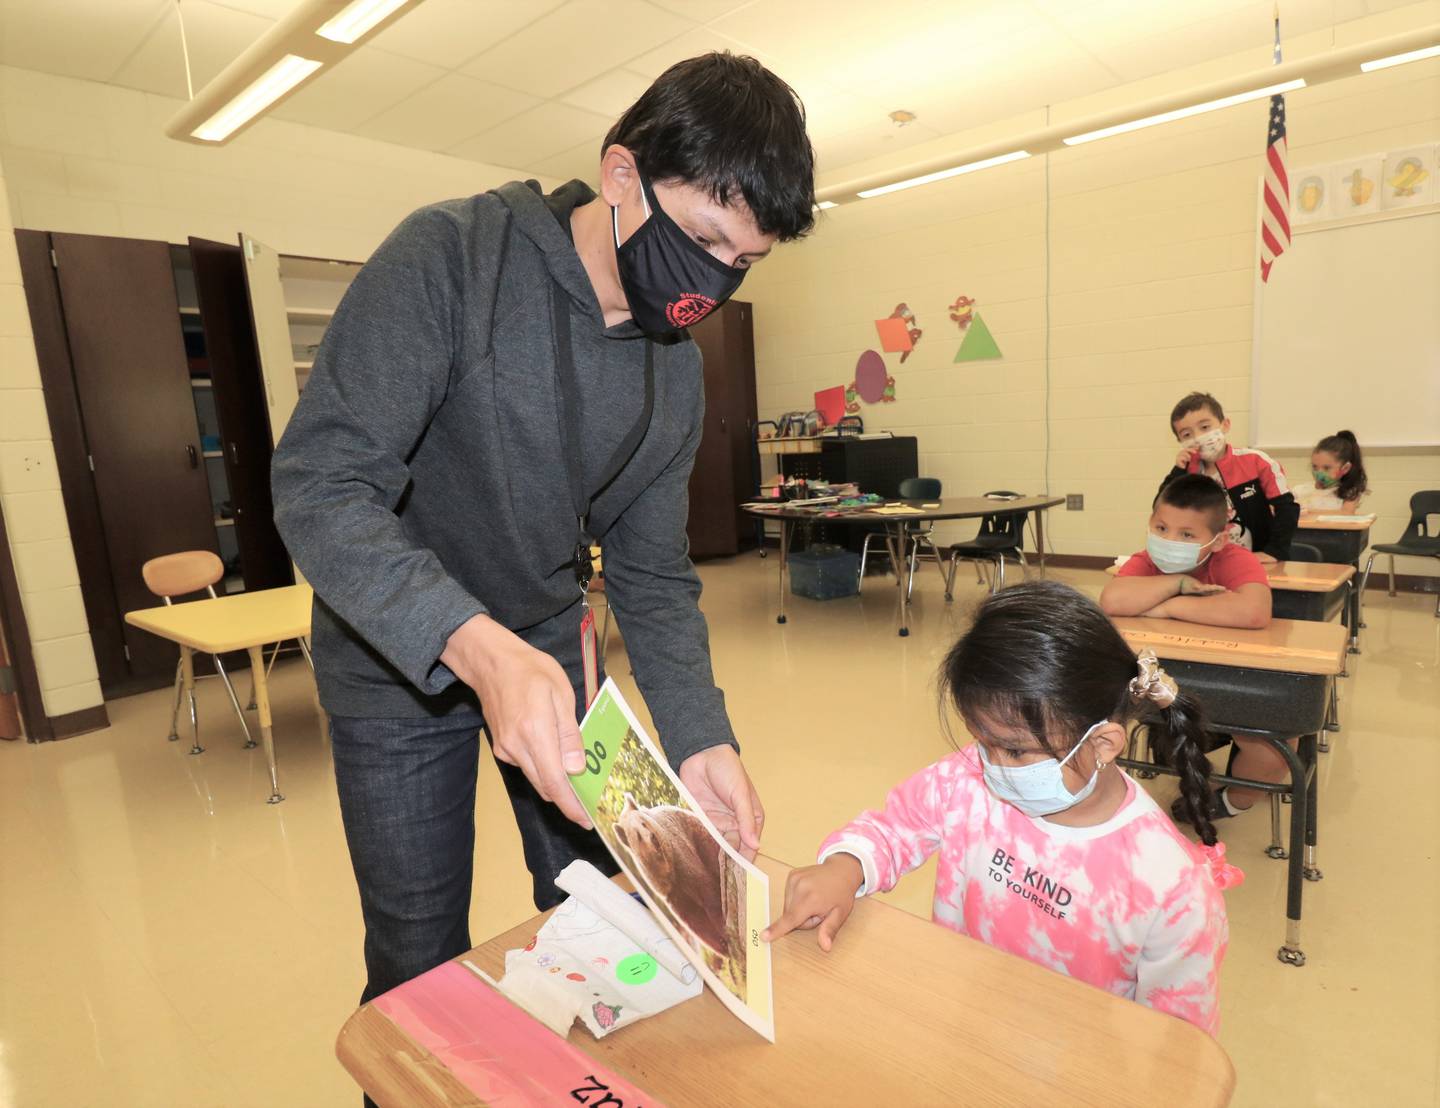 Joliet Public Schools District 86 welcomed three international teachers to the district at the start of the 2021-2022 school year. Augusto Quiroz-Cardenas of Colombia (left) teaches a bilingual kindergarten class at Sator Sanchez Elementary. He is pictured with kindergarten student Brithany Paz Fregozo.